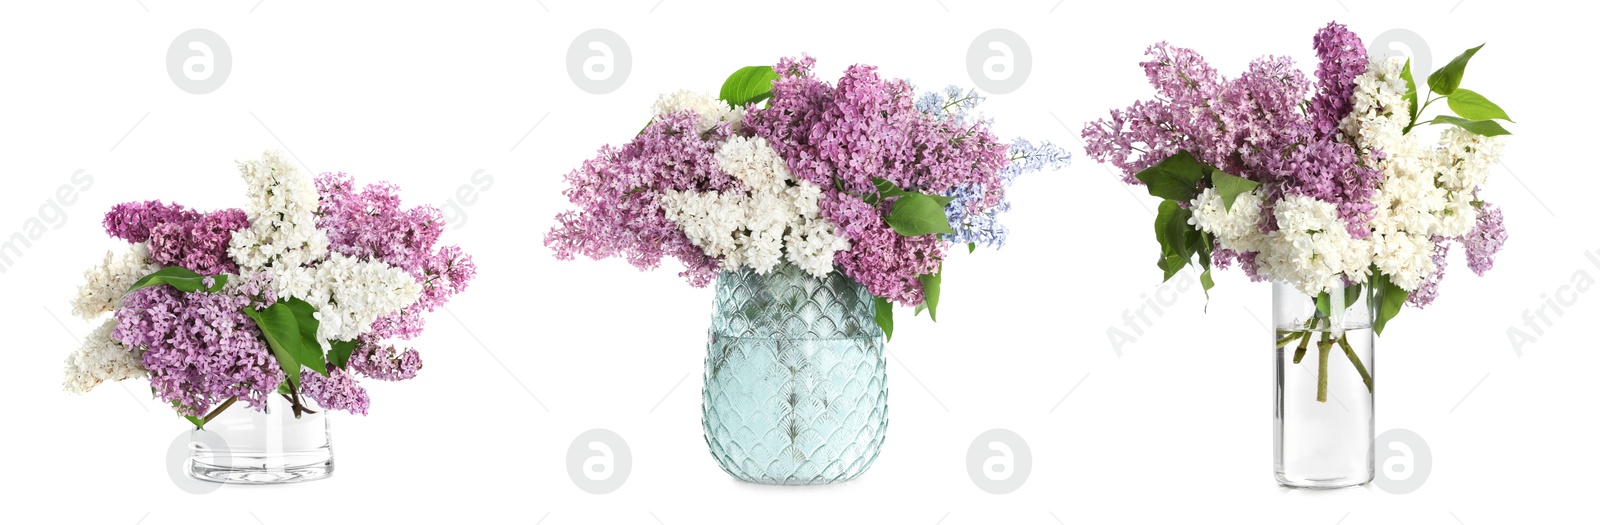 Image of Collage with beautiful lilac flowers in different glass vases on white background. Banner design